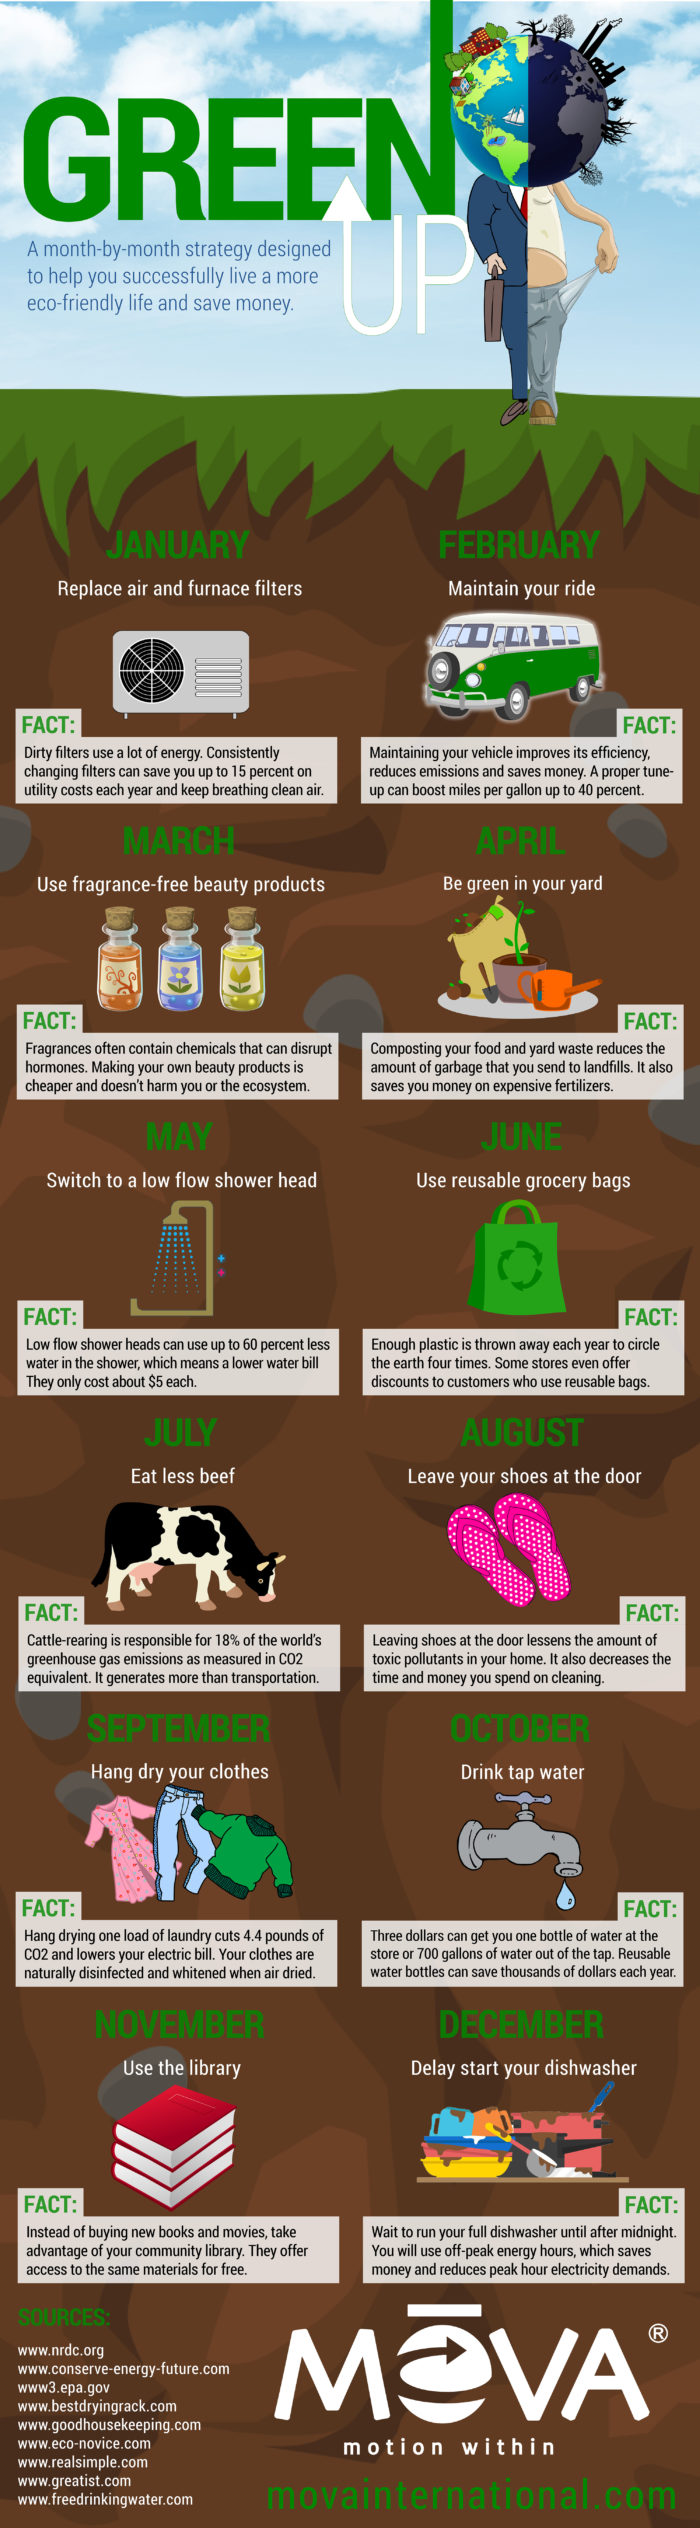 green living guide infographic